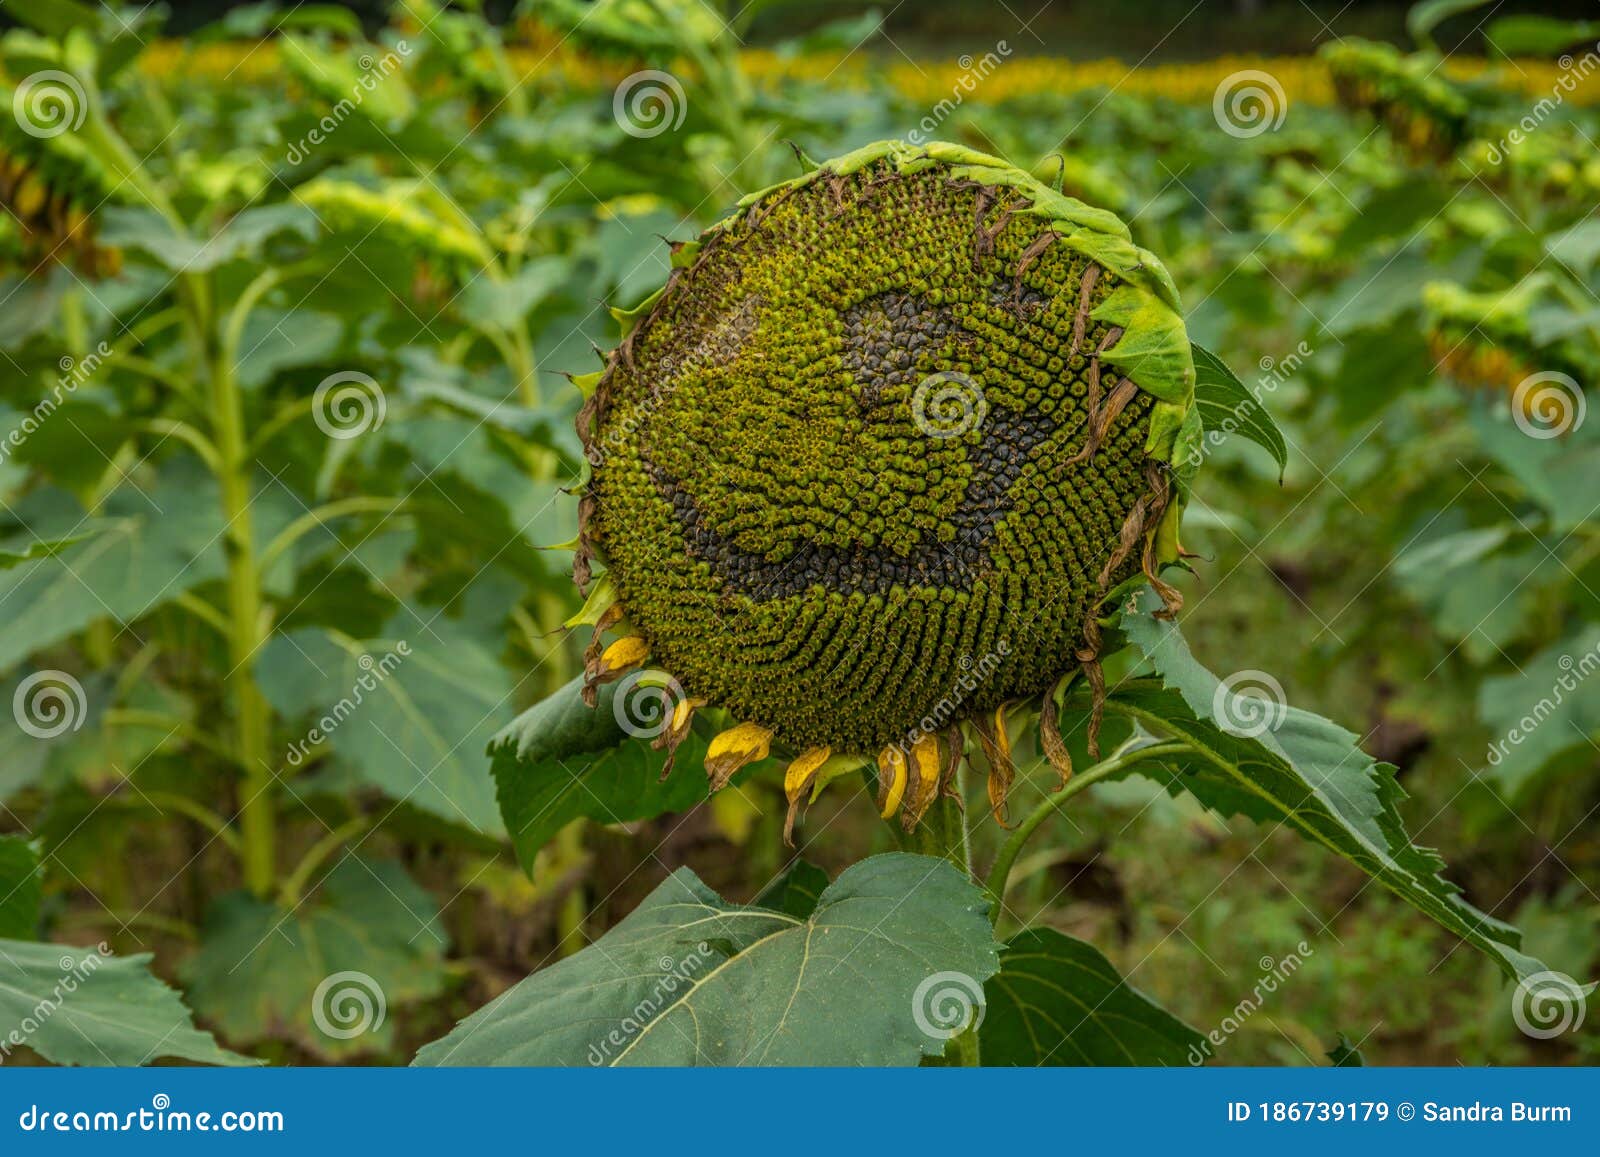 Smiling Sunflower Plant in a Field Stock Image - Image of joyful, grin ...